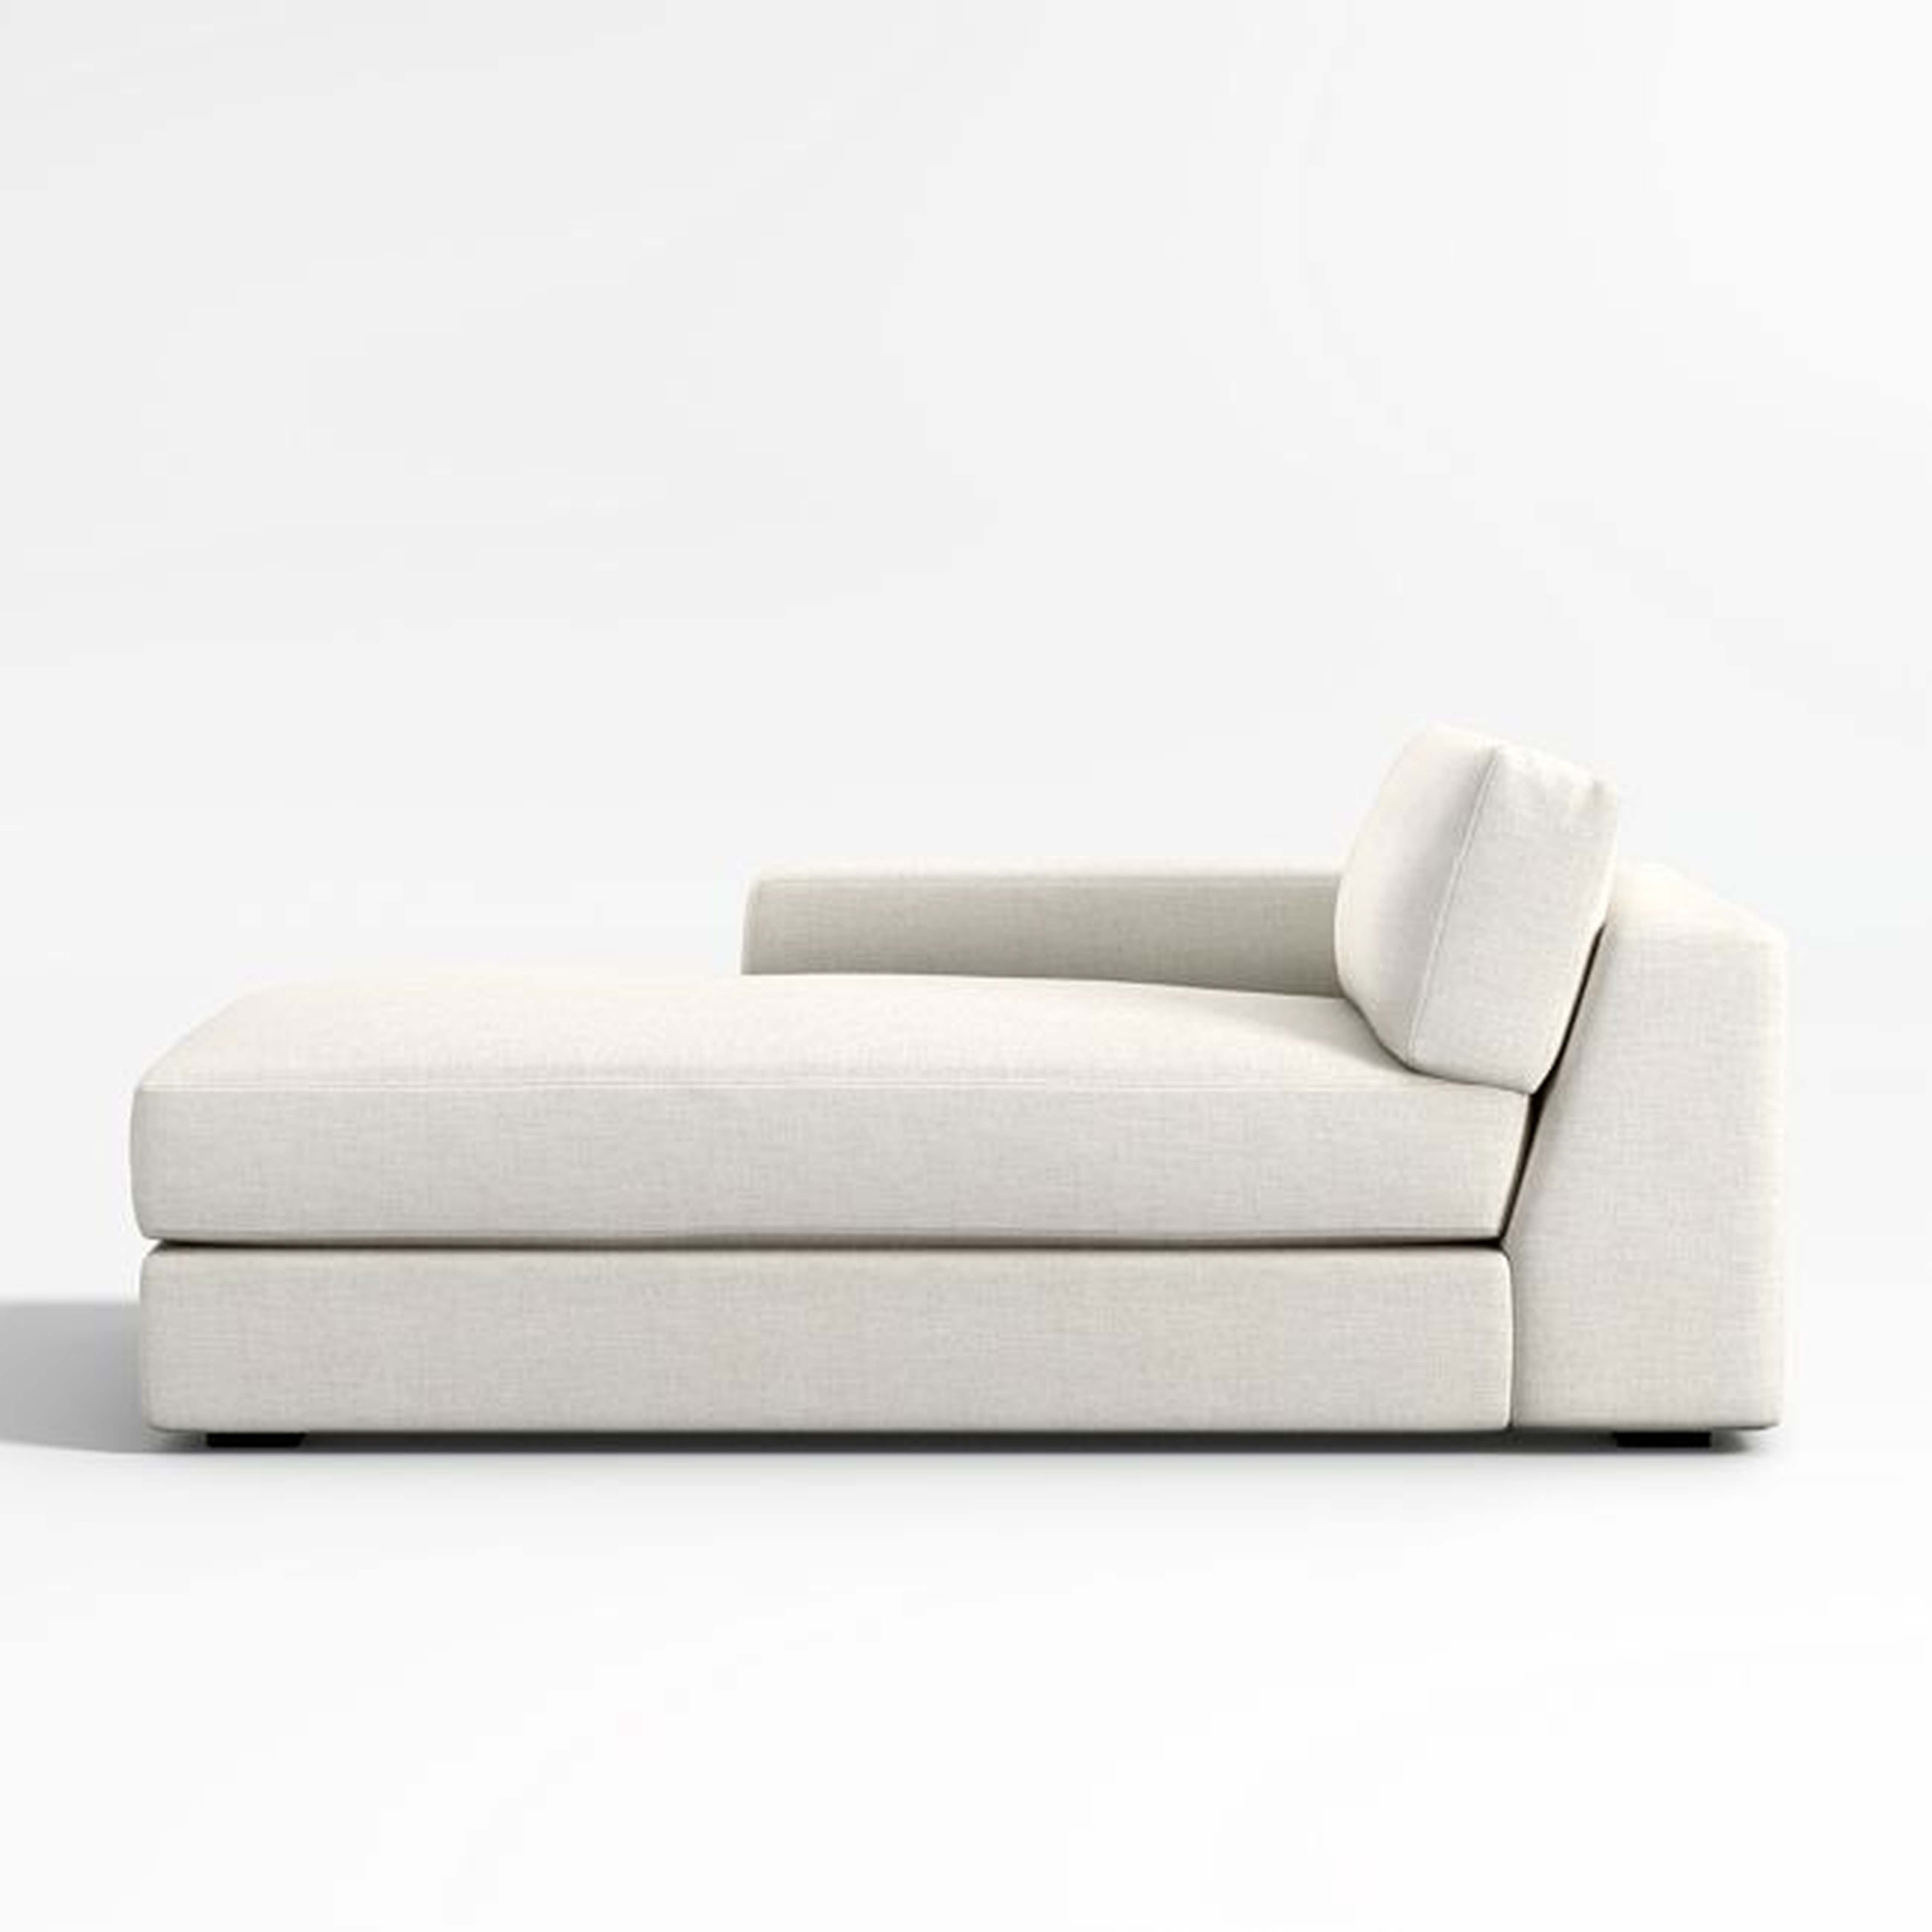 Oceanside Left Wide-Arm Chaise - Crate and Barrel